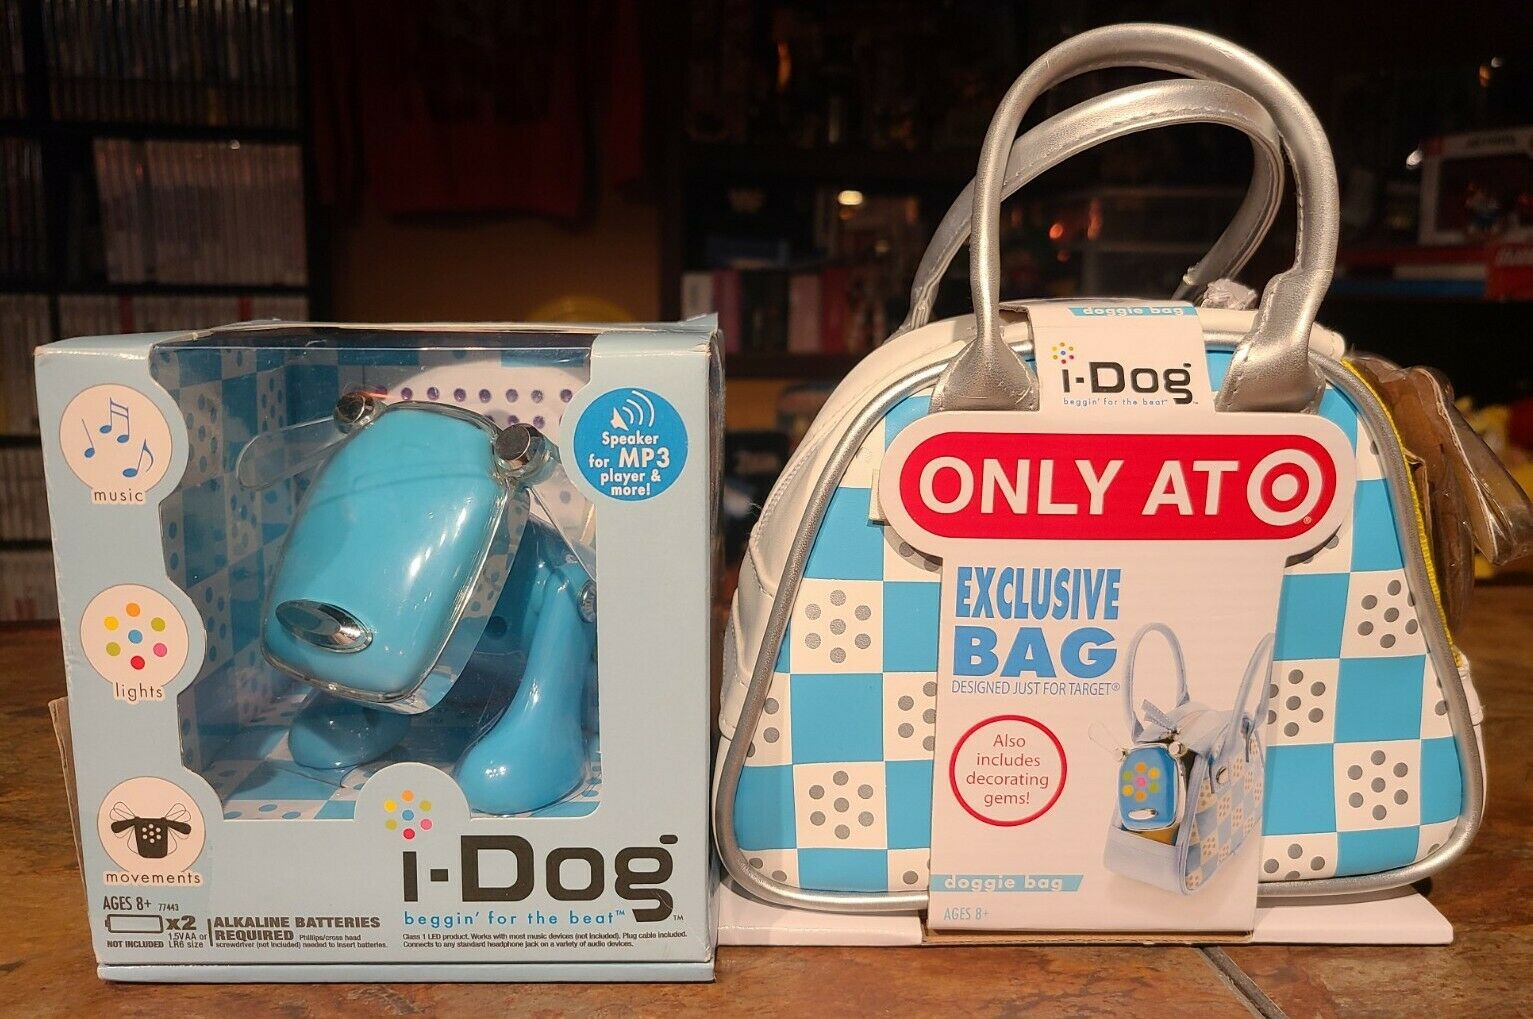 I-dog Mp3 Music Speaker Interactive Hasbro Tiger 2007. Only At Target With Bag